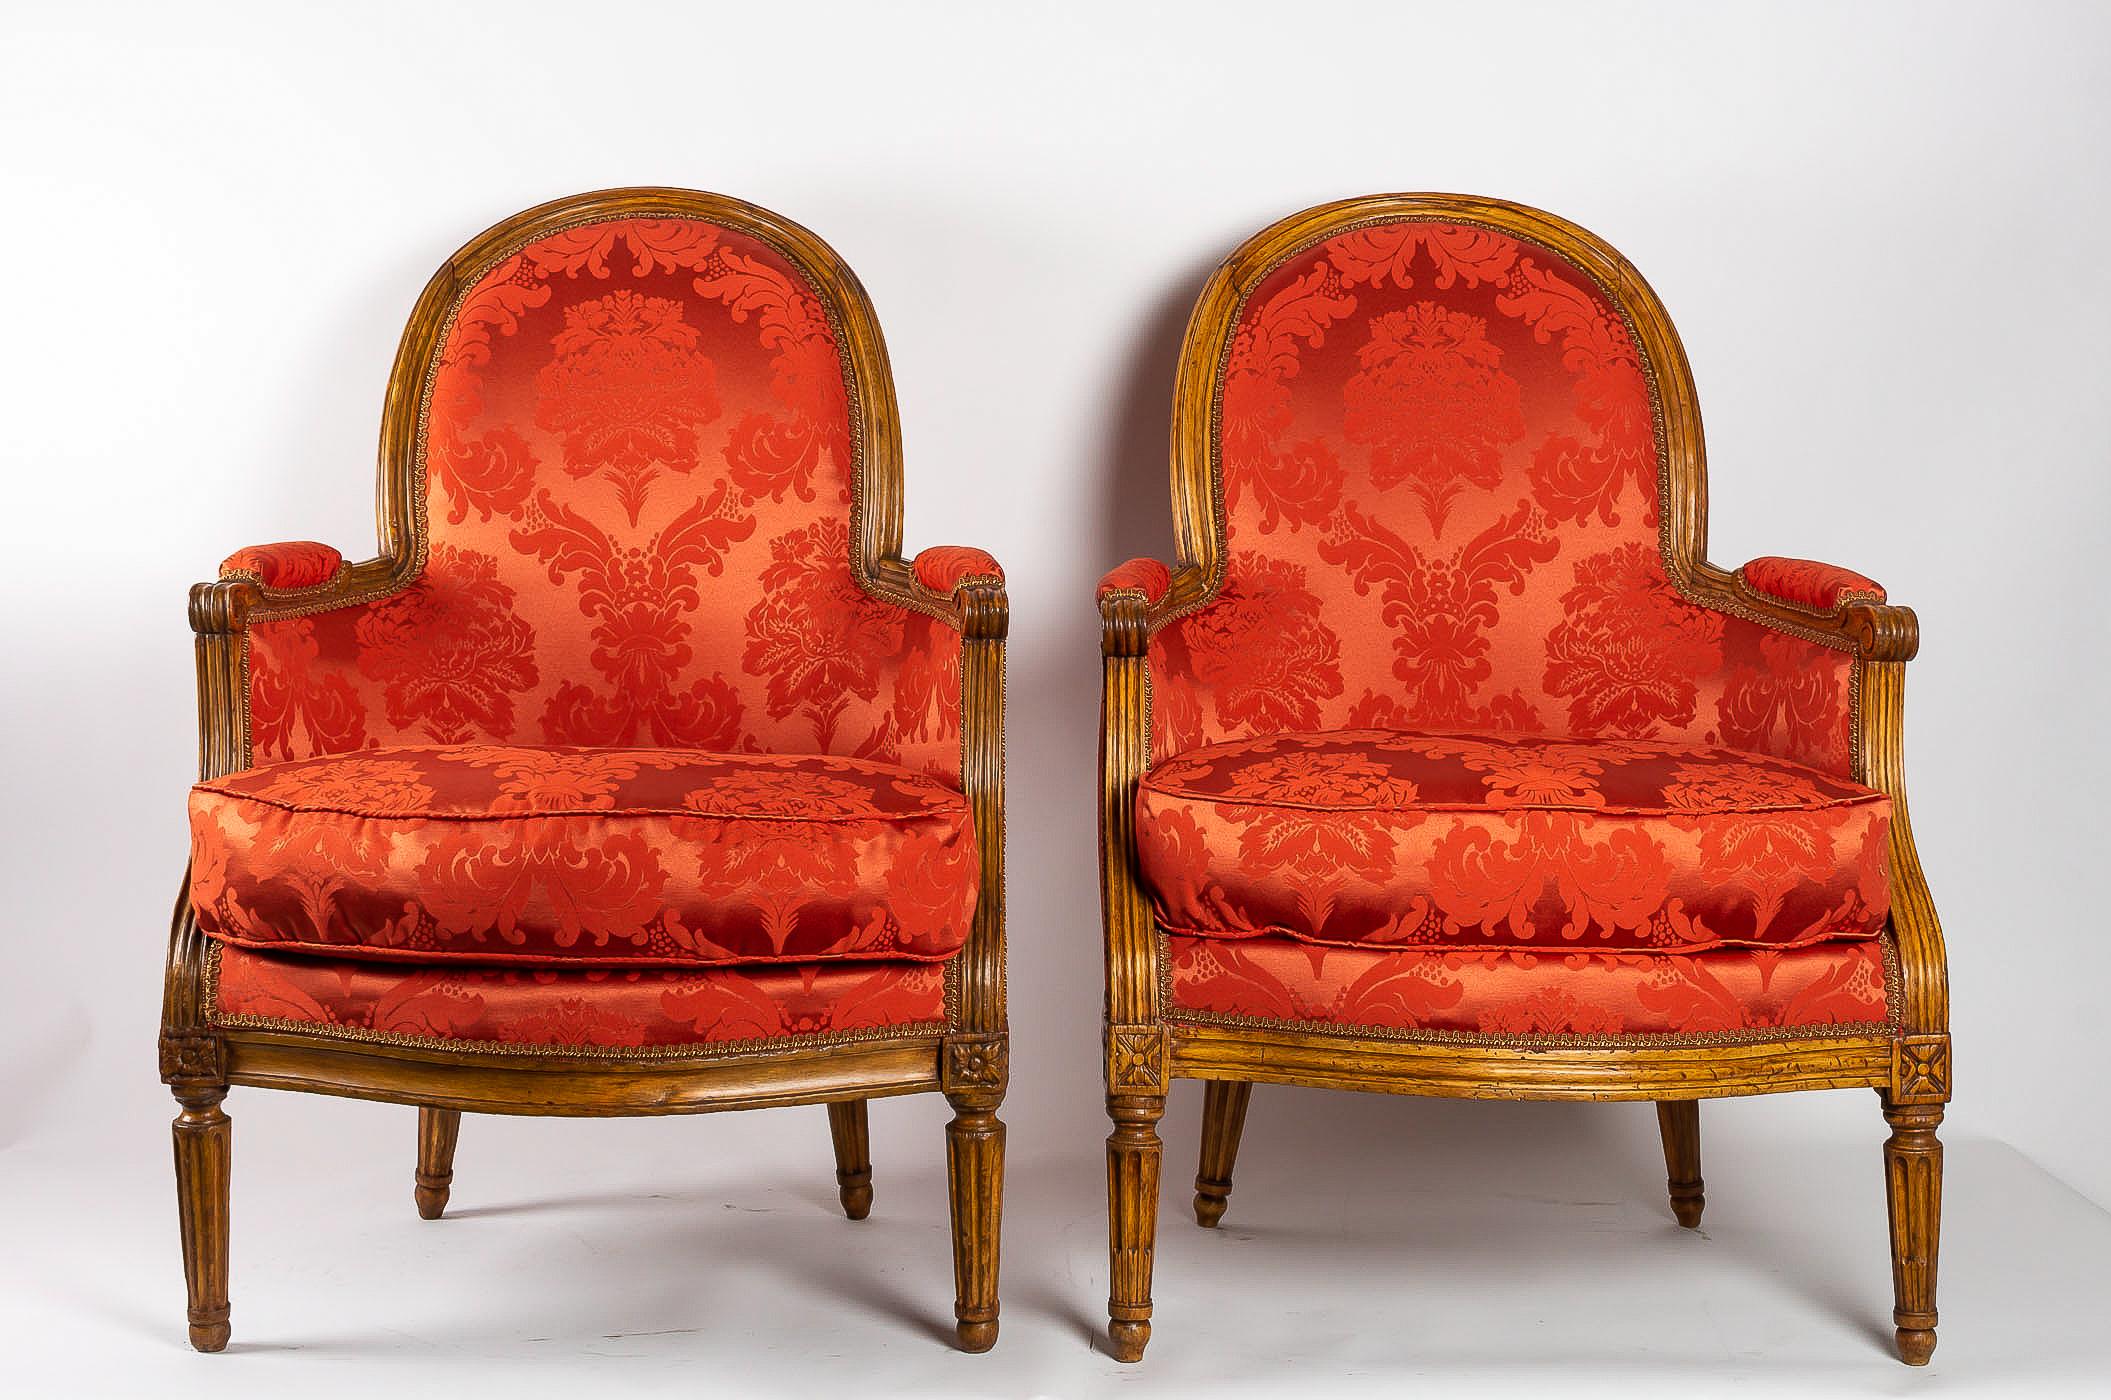 French Louis XVI period set of two bergeres, circa 1780.

A gorgeous French Louis XVI period set of two bergeres in natural beech-wood in a neoclassical detailing and form.

Beautiful French work, late 18th century, Louis XVI period set of two